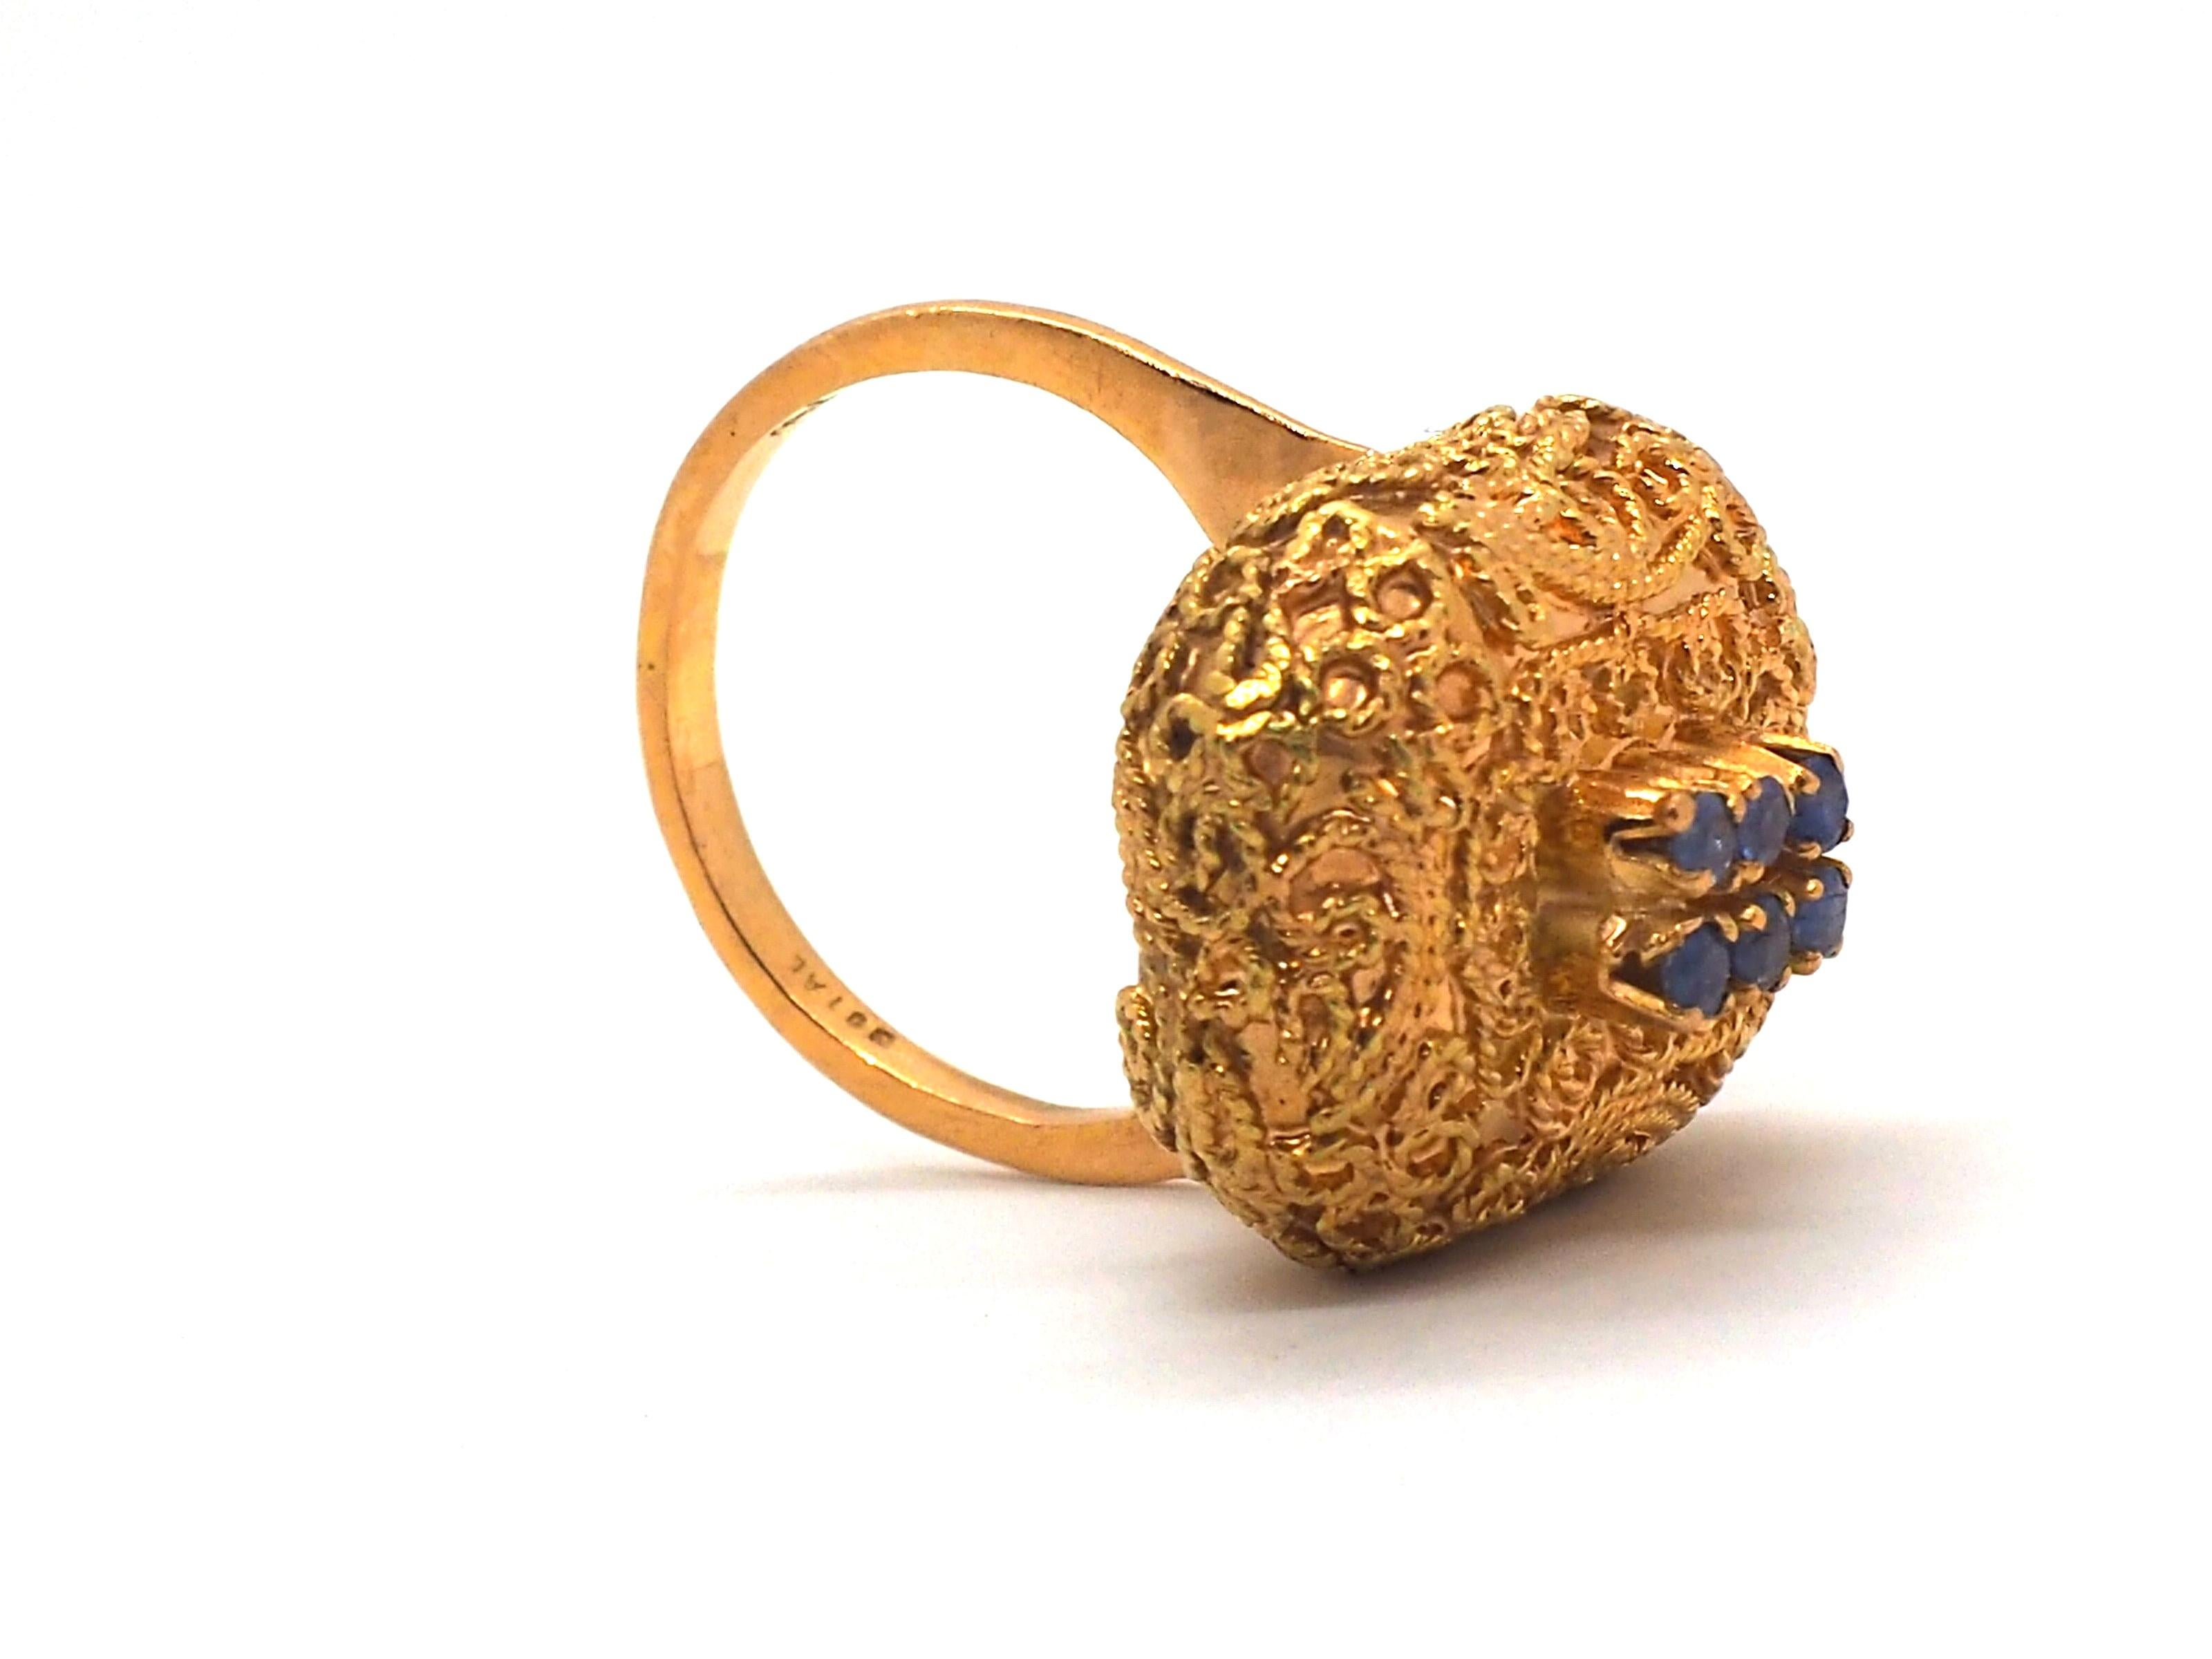 A vintage ring made of 18k yellow gold is a unique exclusive  piece of jewelry. The warm tone of the yellow gold gives the ring a timeless and elegant appeal.

The ring is adorned with six small sapphires, which add a touch of color and sparkle.